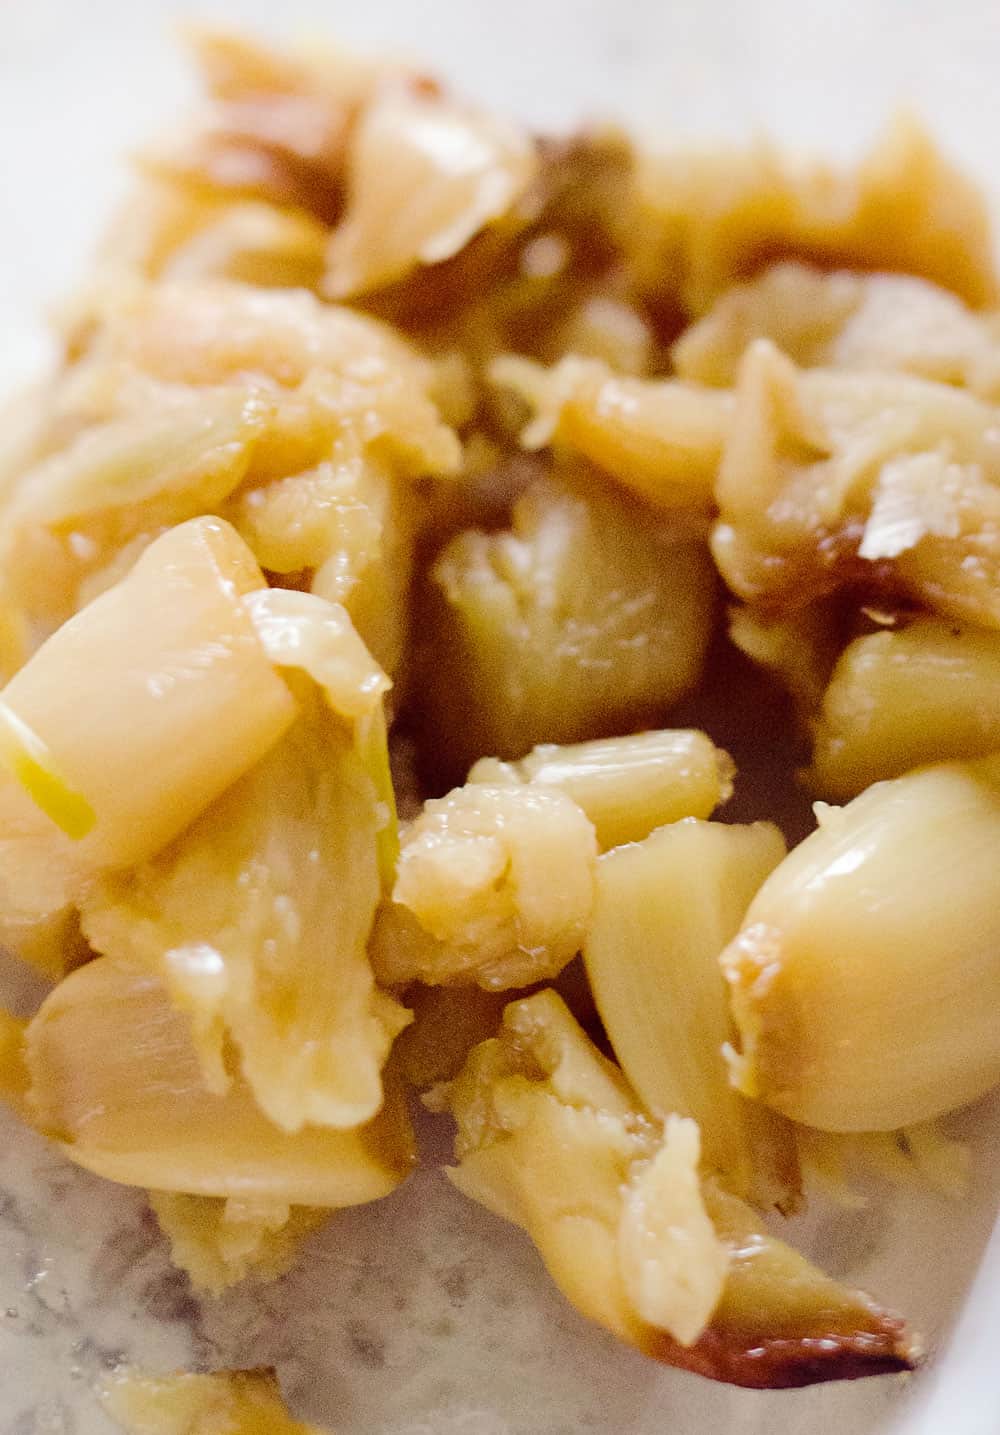 Learn How to Make Roasted Garlic, which is an easy way to add a huge burst of flavor to any dish!